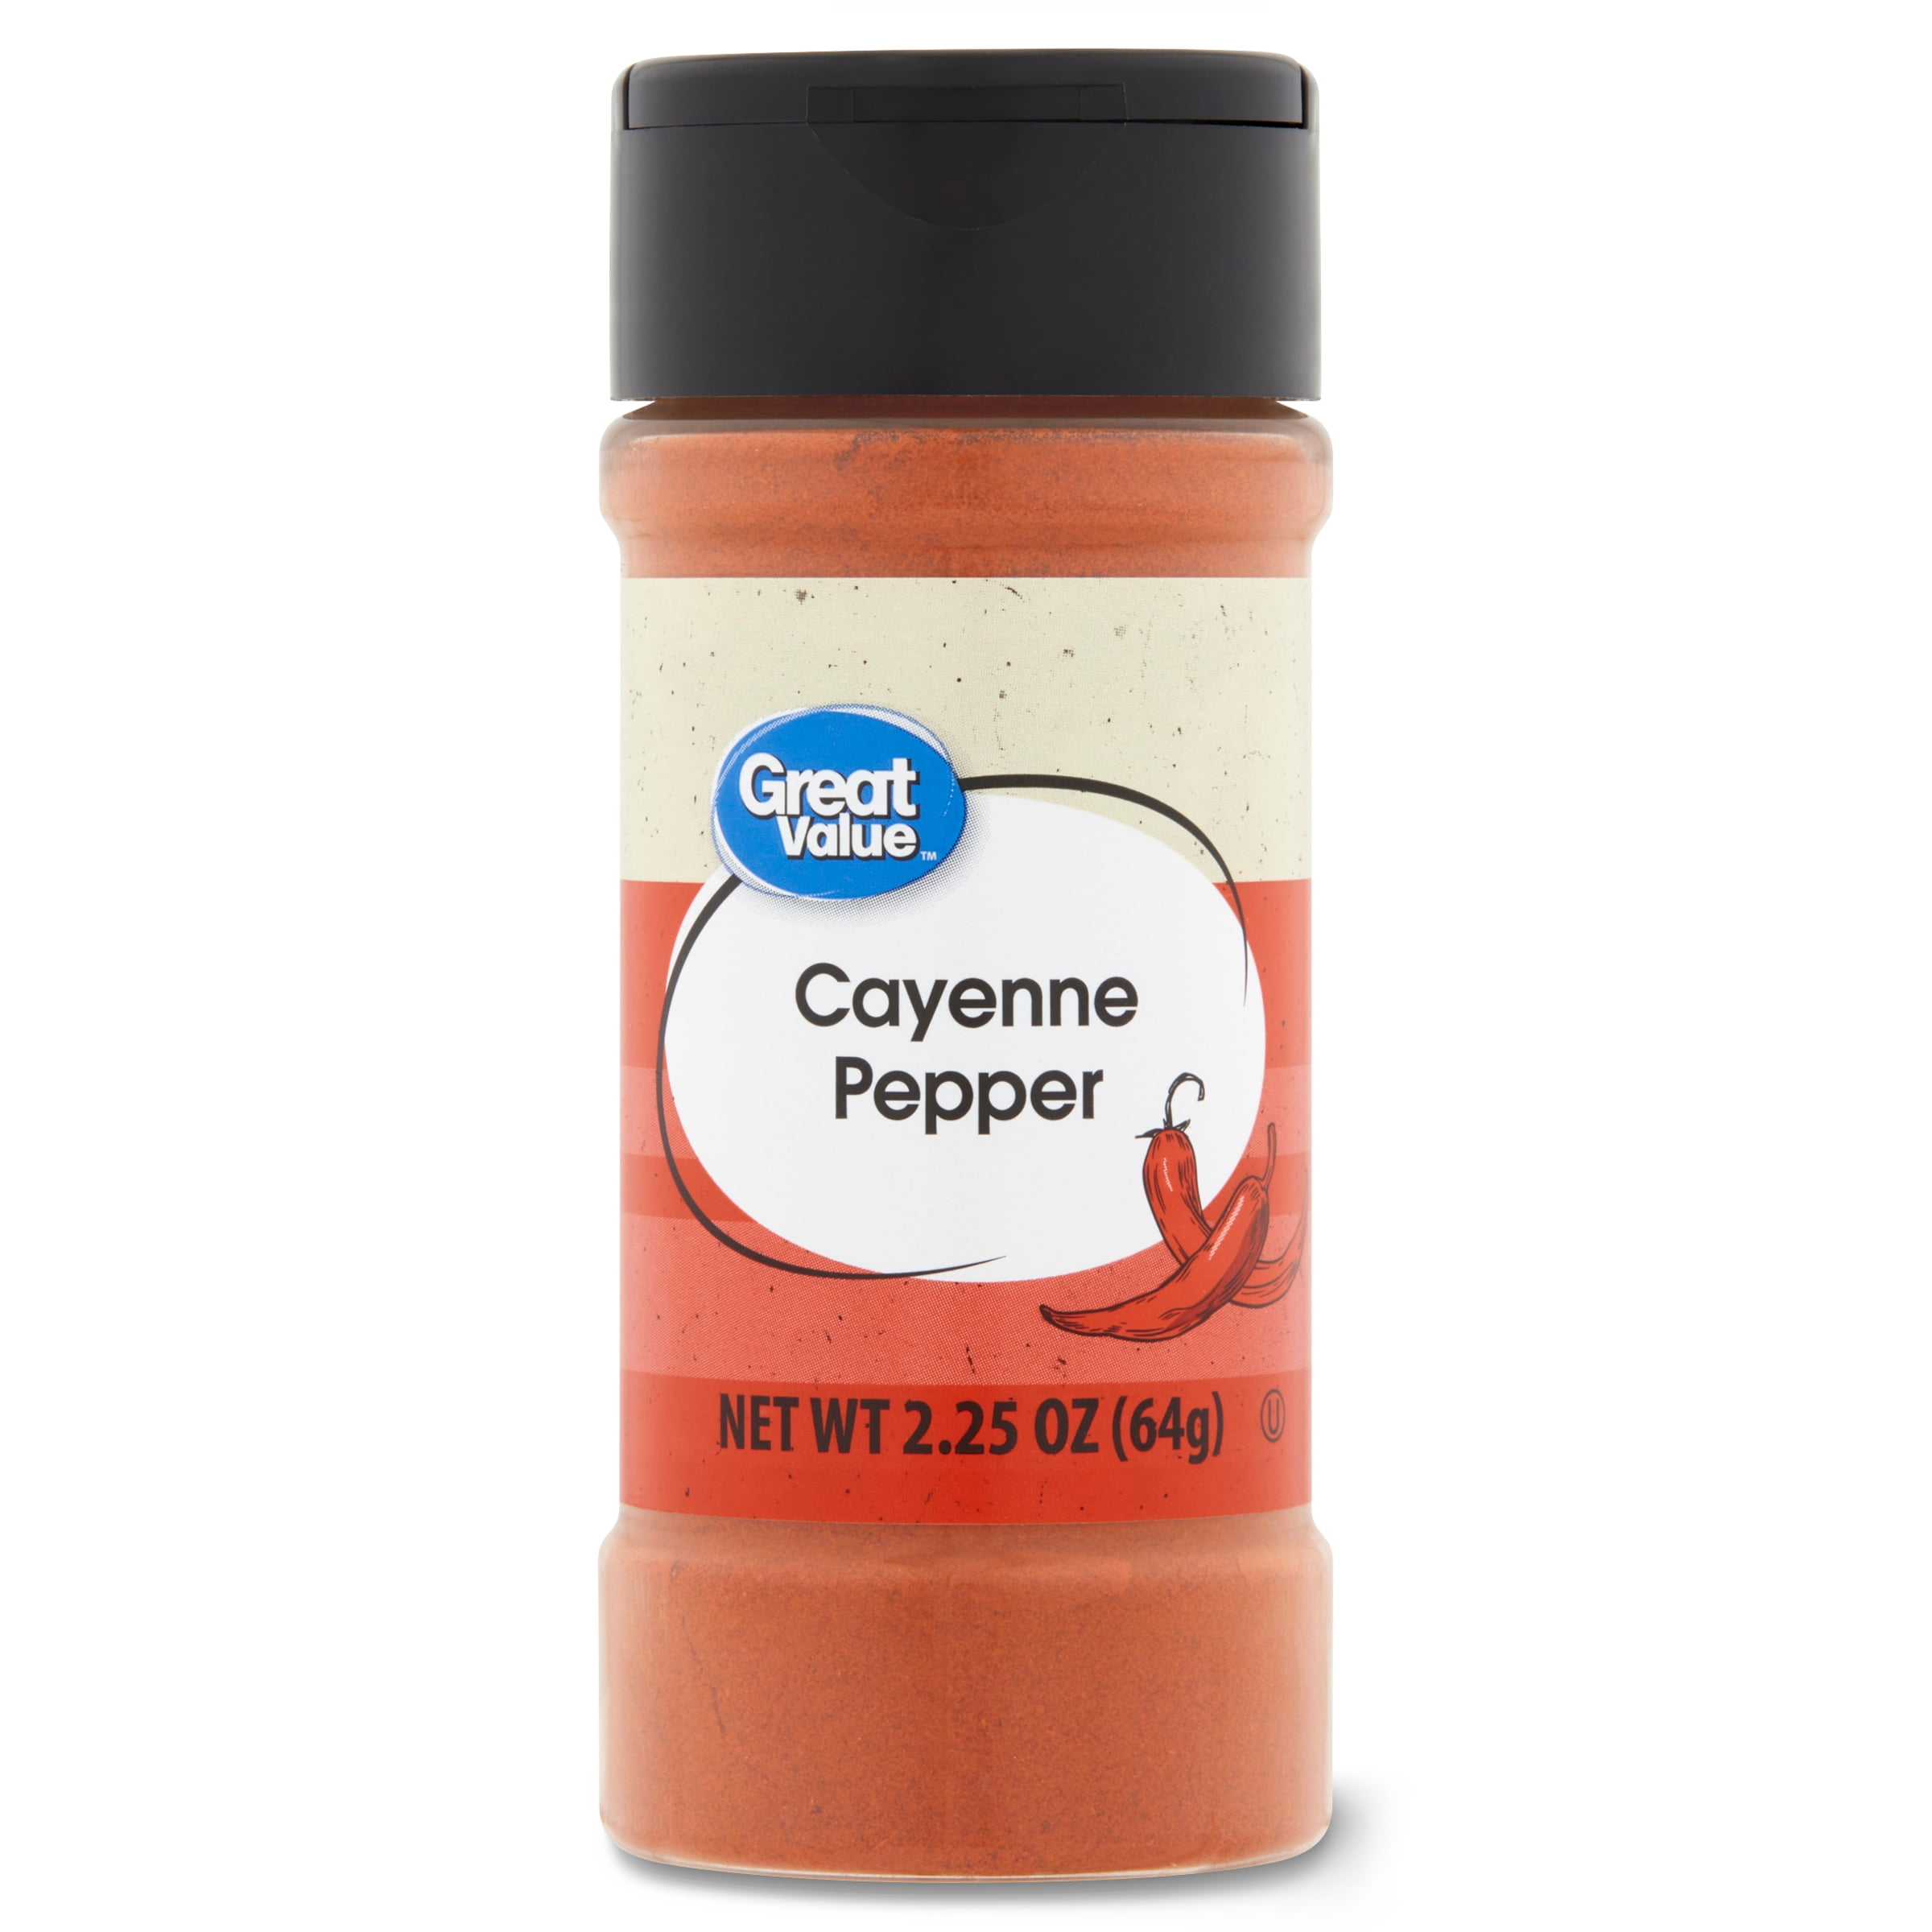 Great Value Cayenne Pepper, 2.25 oz